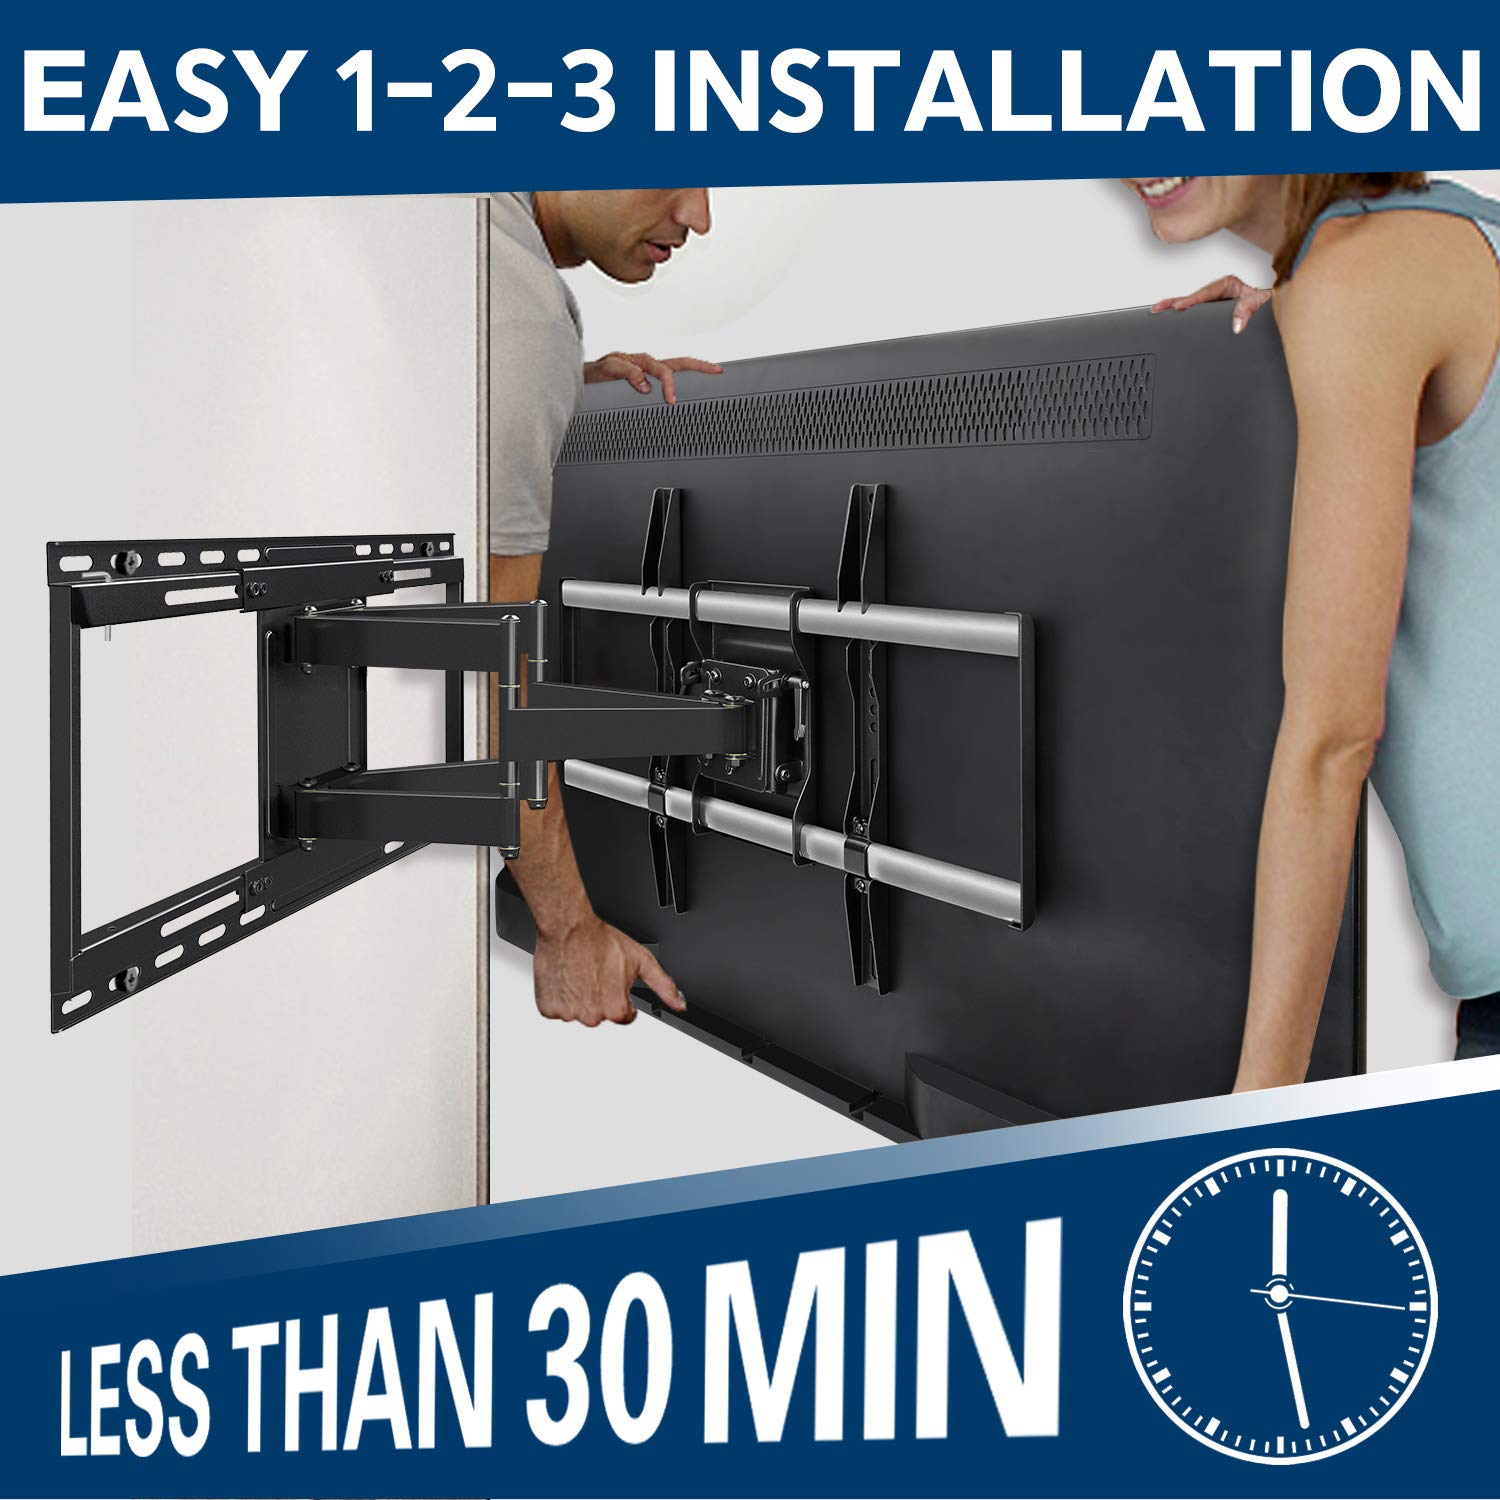 Full motion TV mount for 42-70 inch LG, Sony, Sumsung LED TVs-1